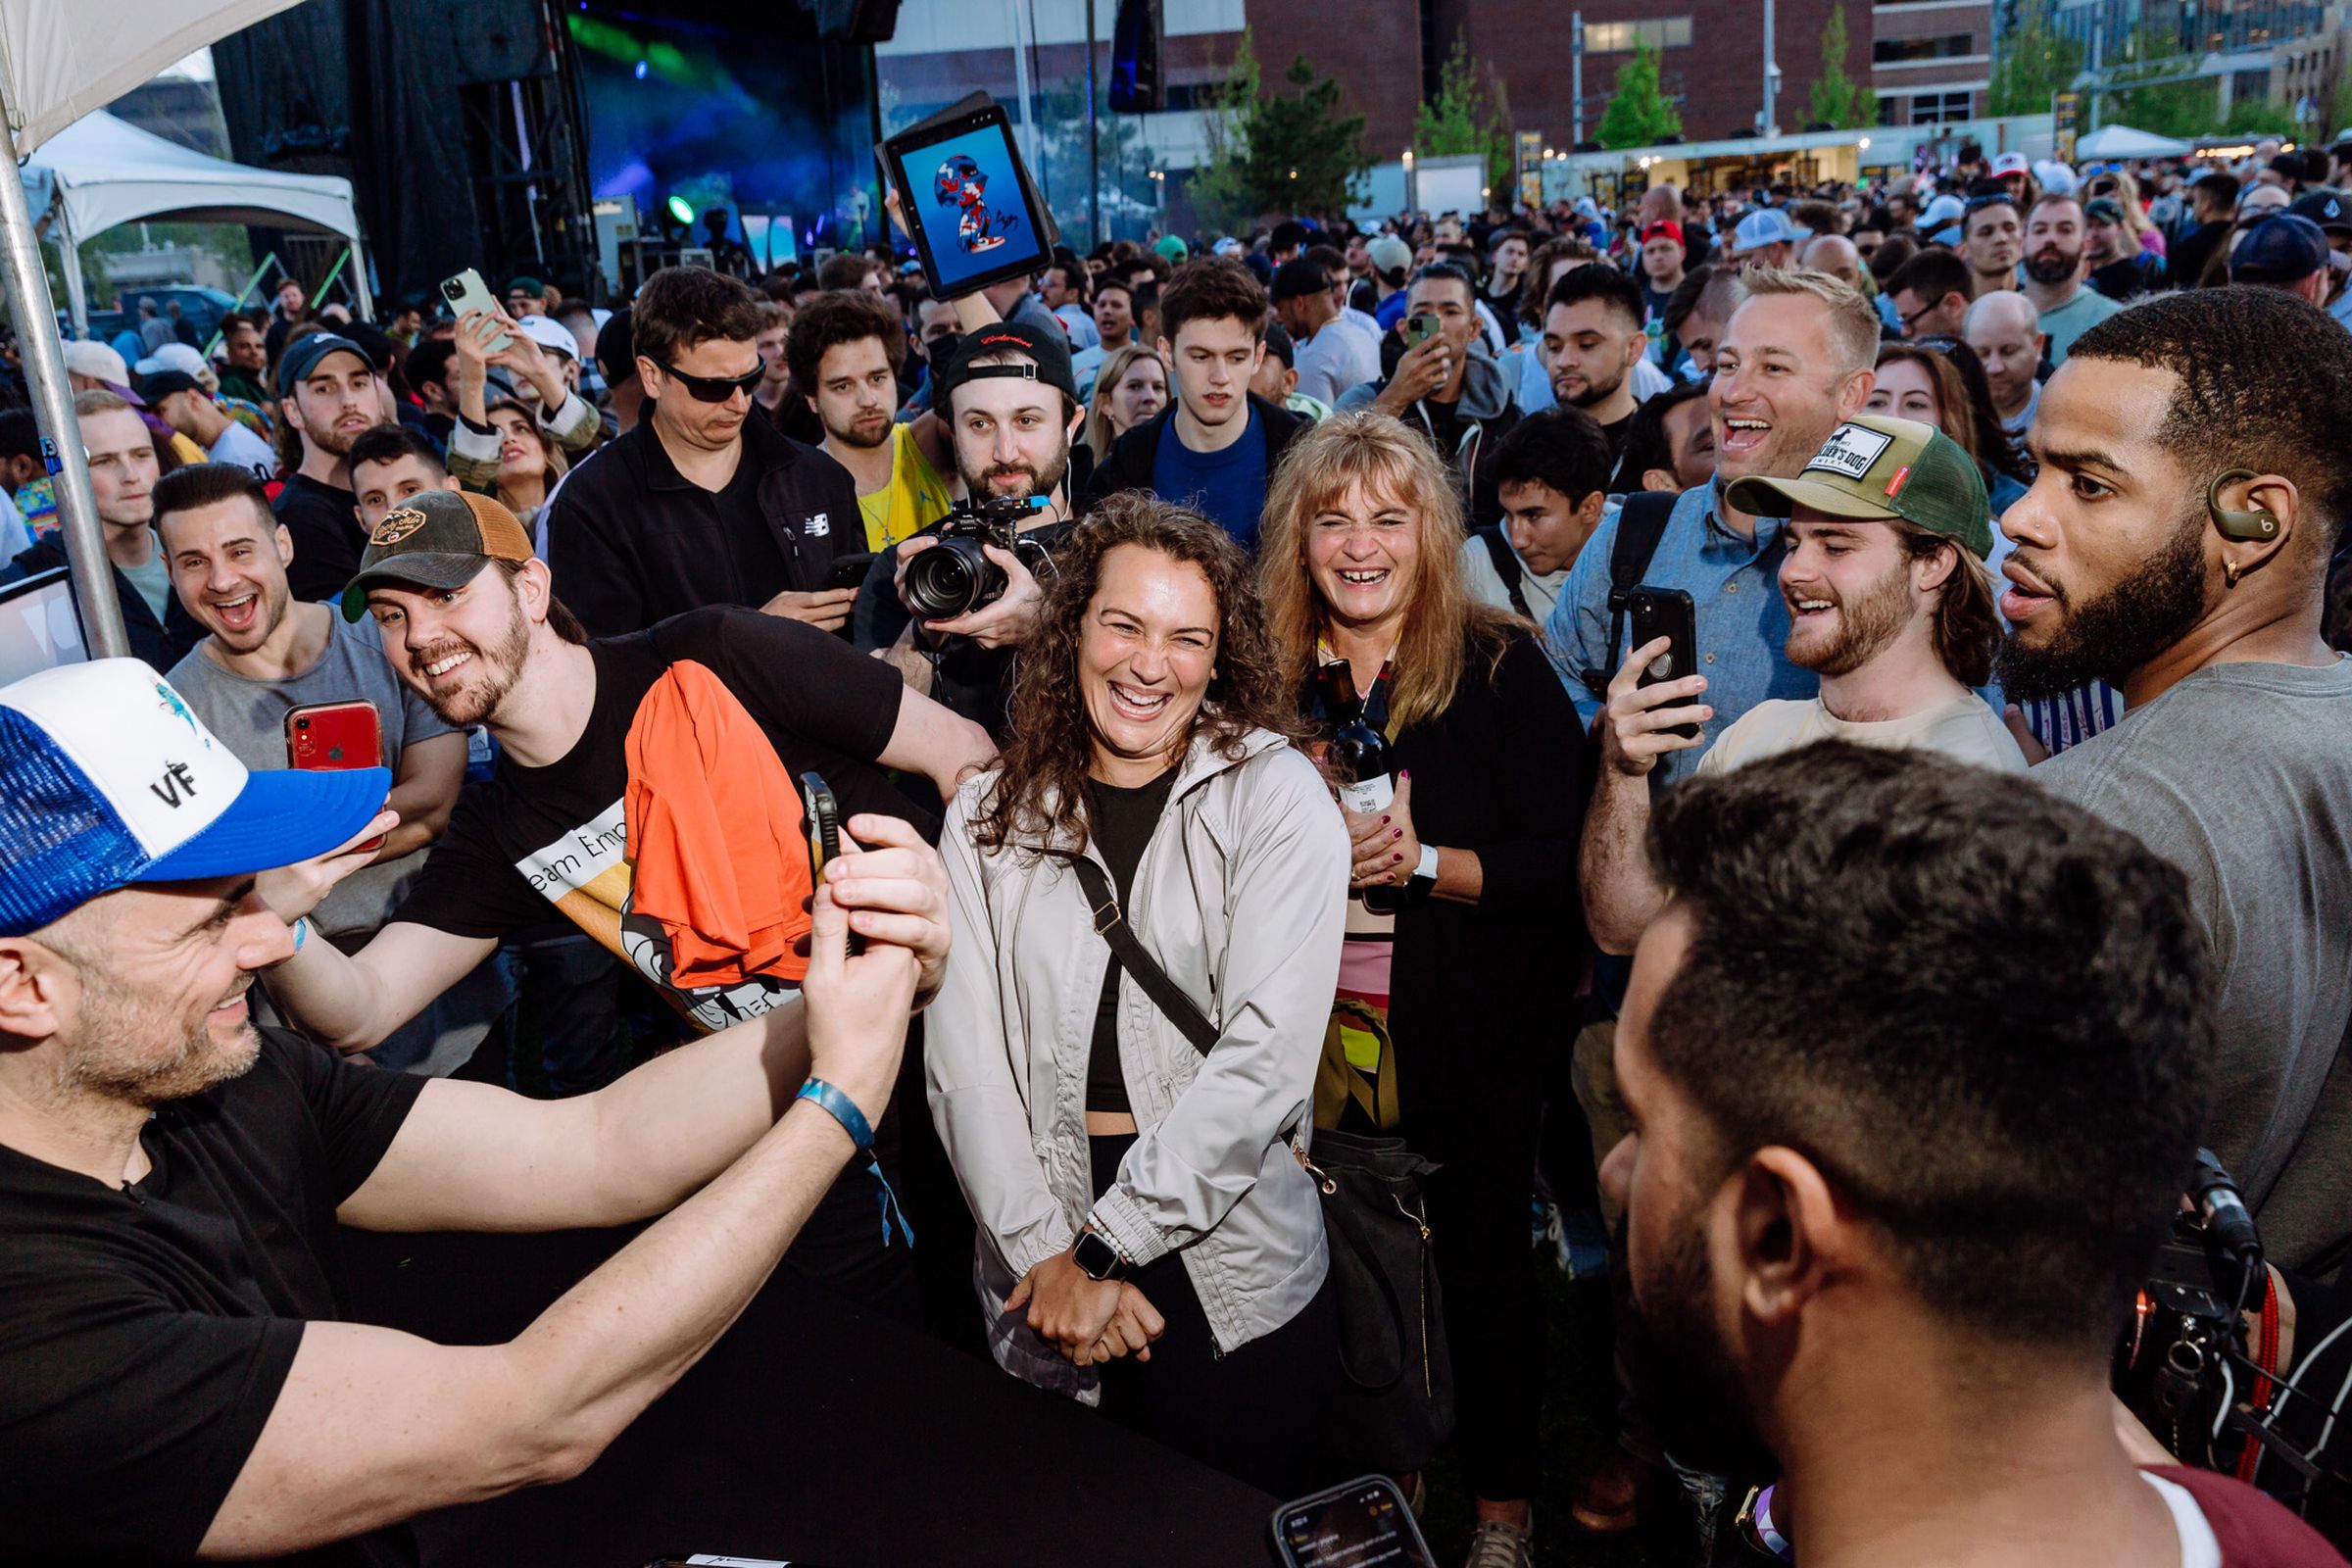 Gary Vaynerchuk (left) spent hours taking selfies with fans.